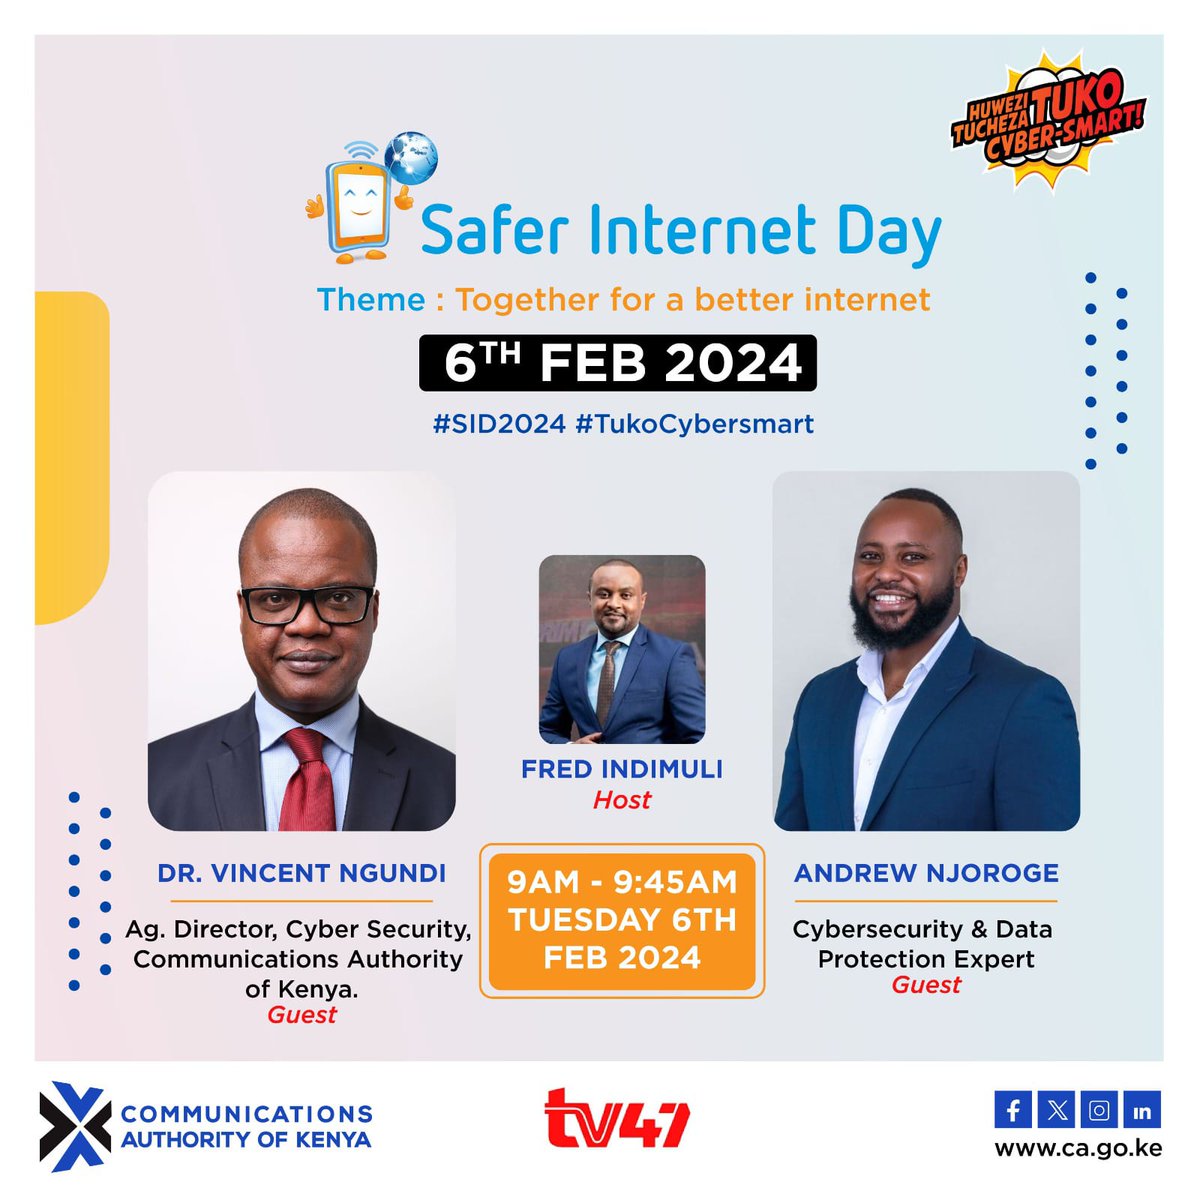 Starting at 9am, watch @tv47news for an exclusive television interview commemorating Safer Internet Day! Engage in the discussion with @Fredindimuli as he converses with @VincentNgundi from CA and cybersecurity specialist Andrew Njoroge.#CA4SID2024 #TukoCyberSmart…